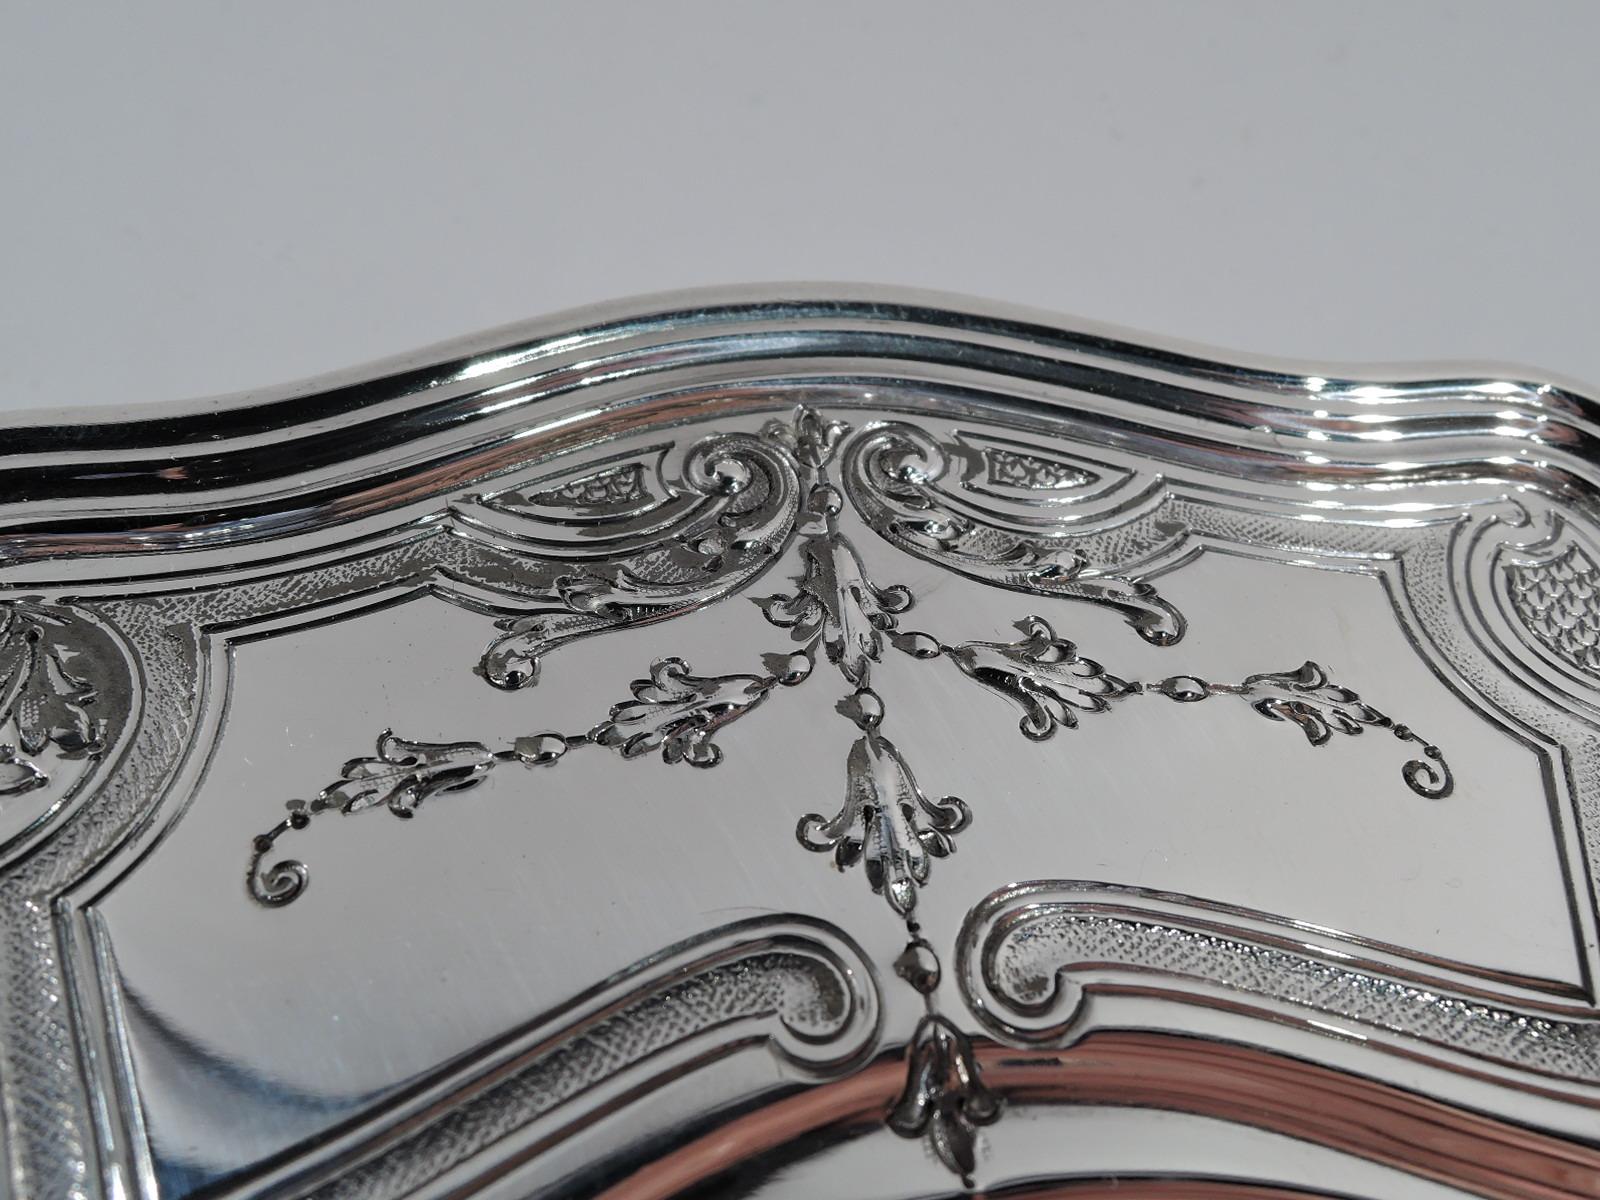 Set of 6 Antique Gorham Edwardian Rococo Sterling Silver Dinner Plates Chargers 1